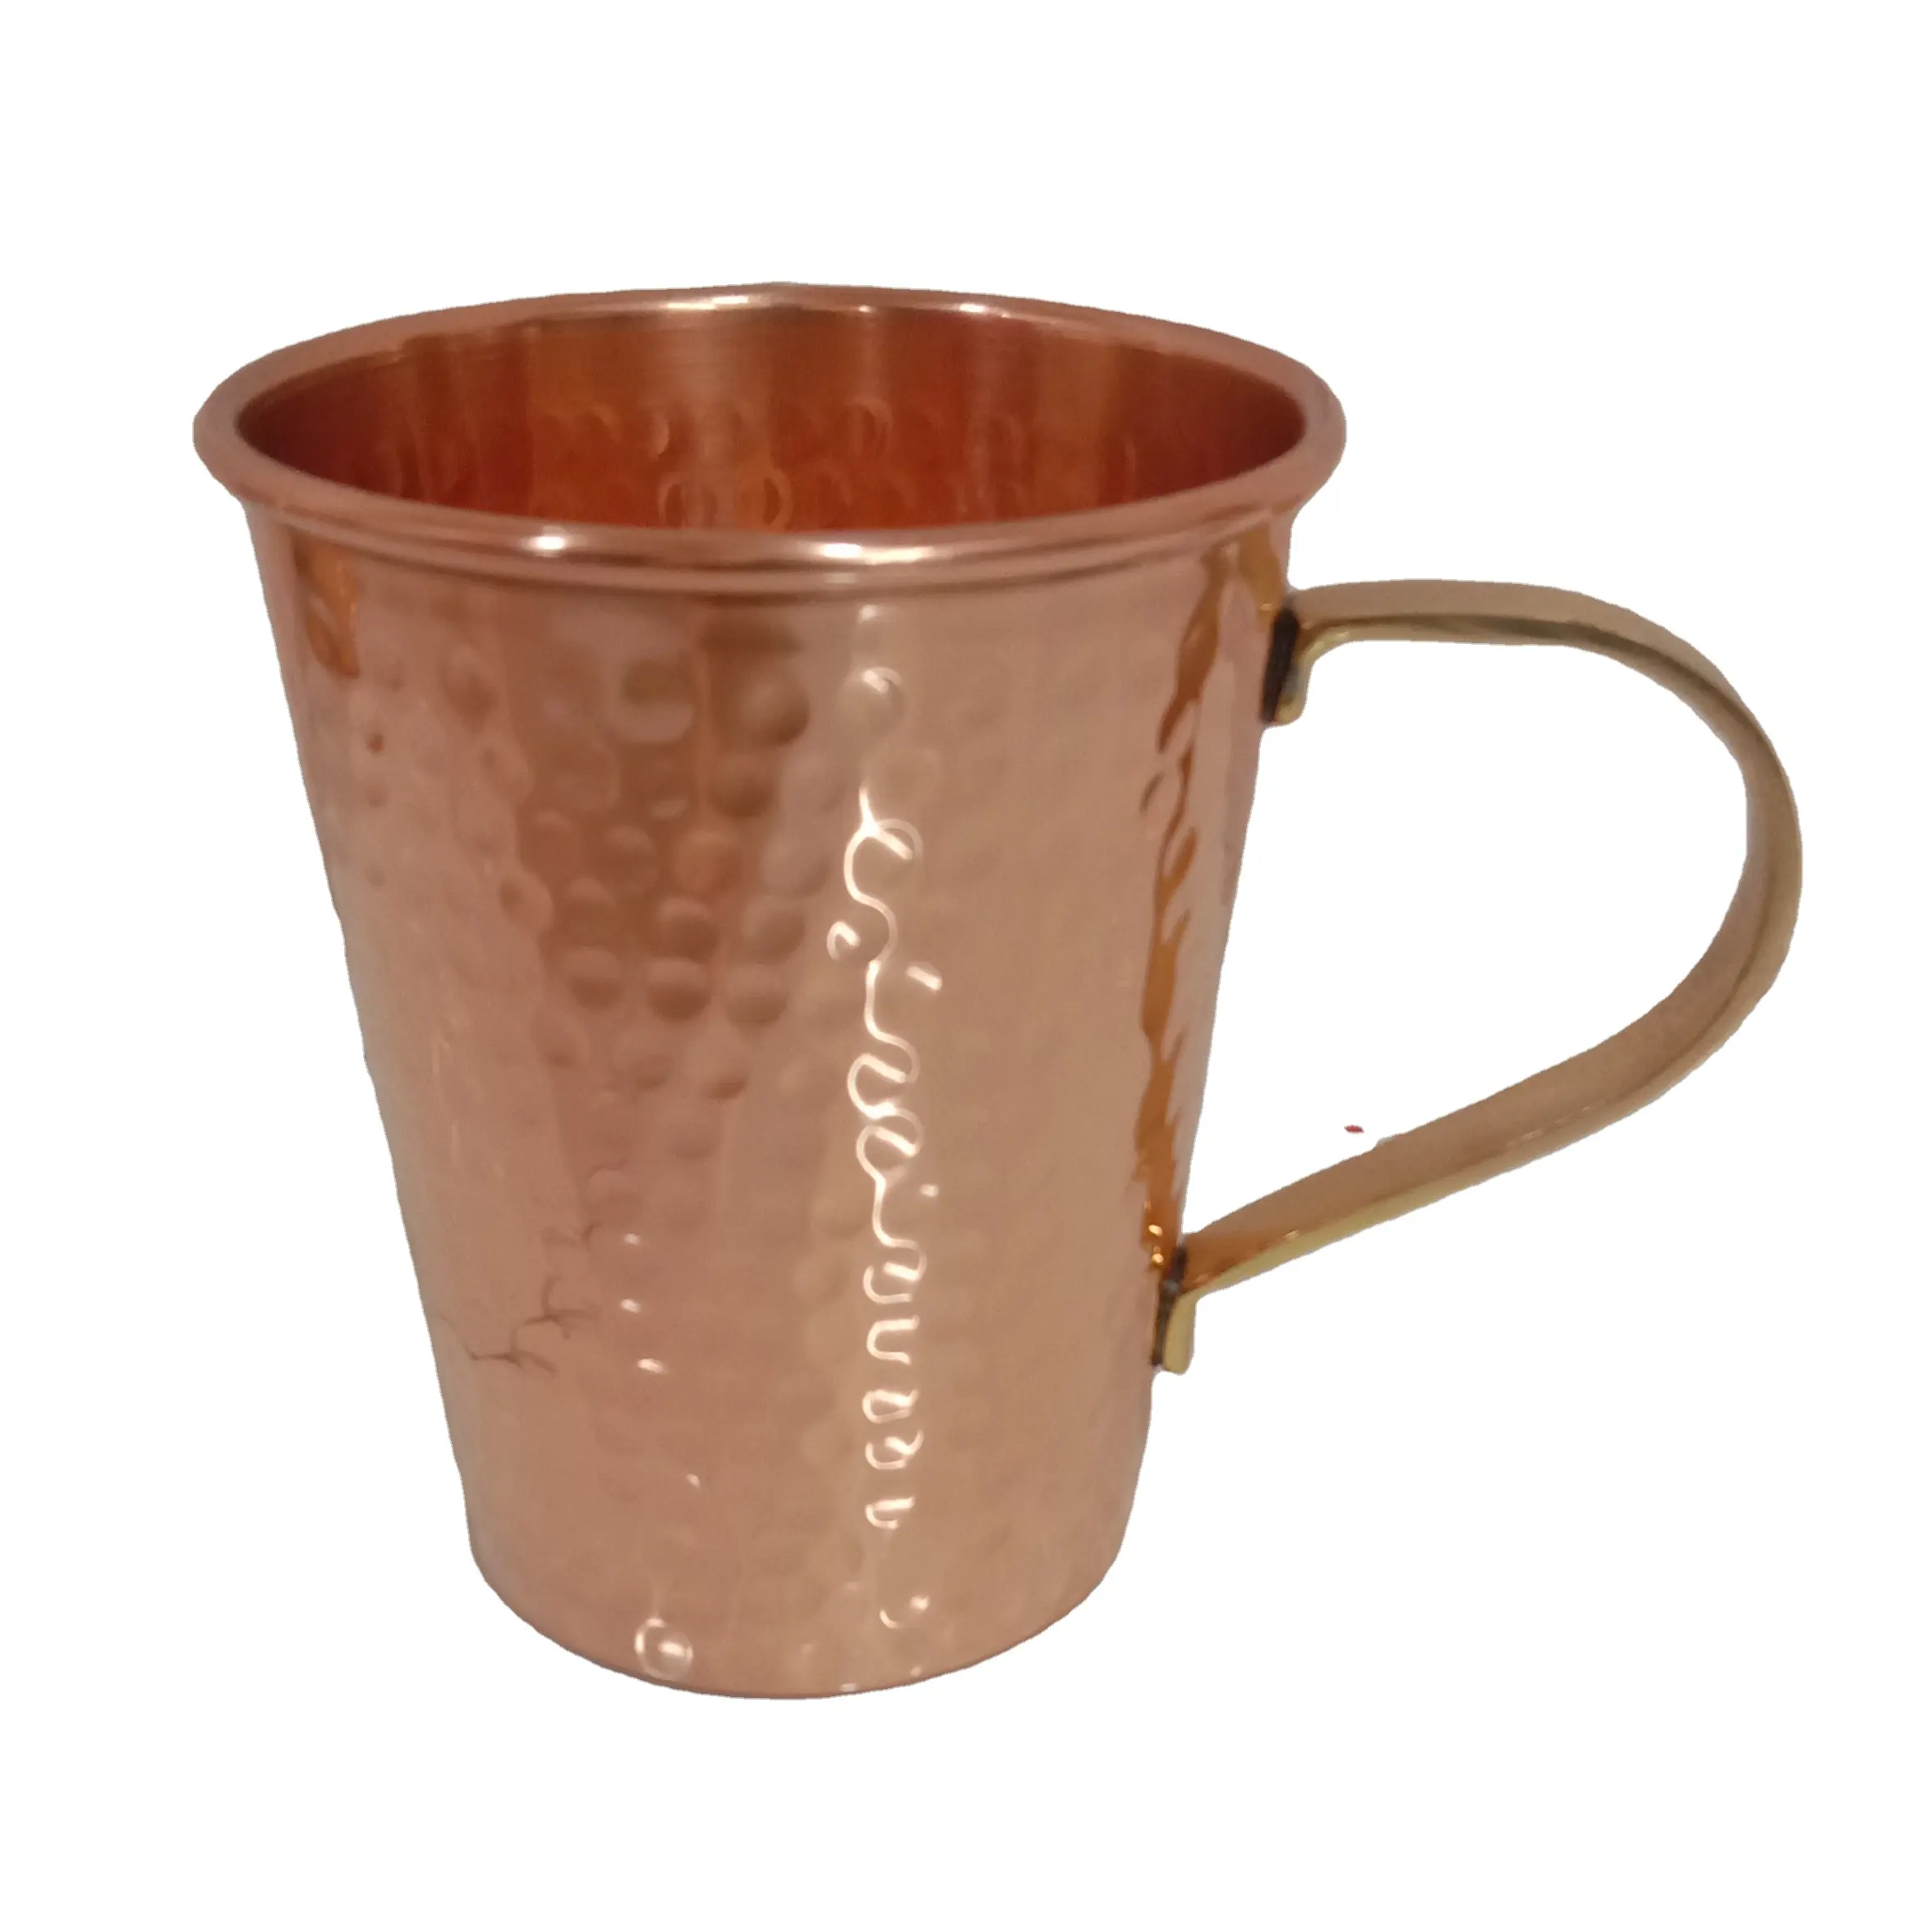 Manufacturers of pure copper beer mugs customized pure copper mugs cheap and best drink ware mugs in reasonable price